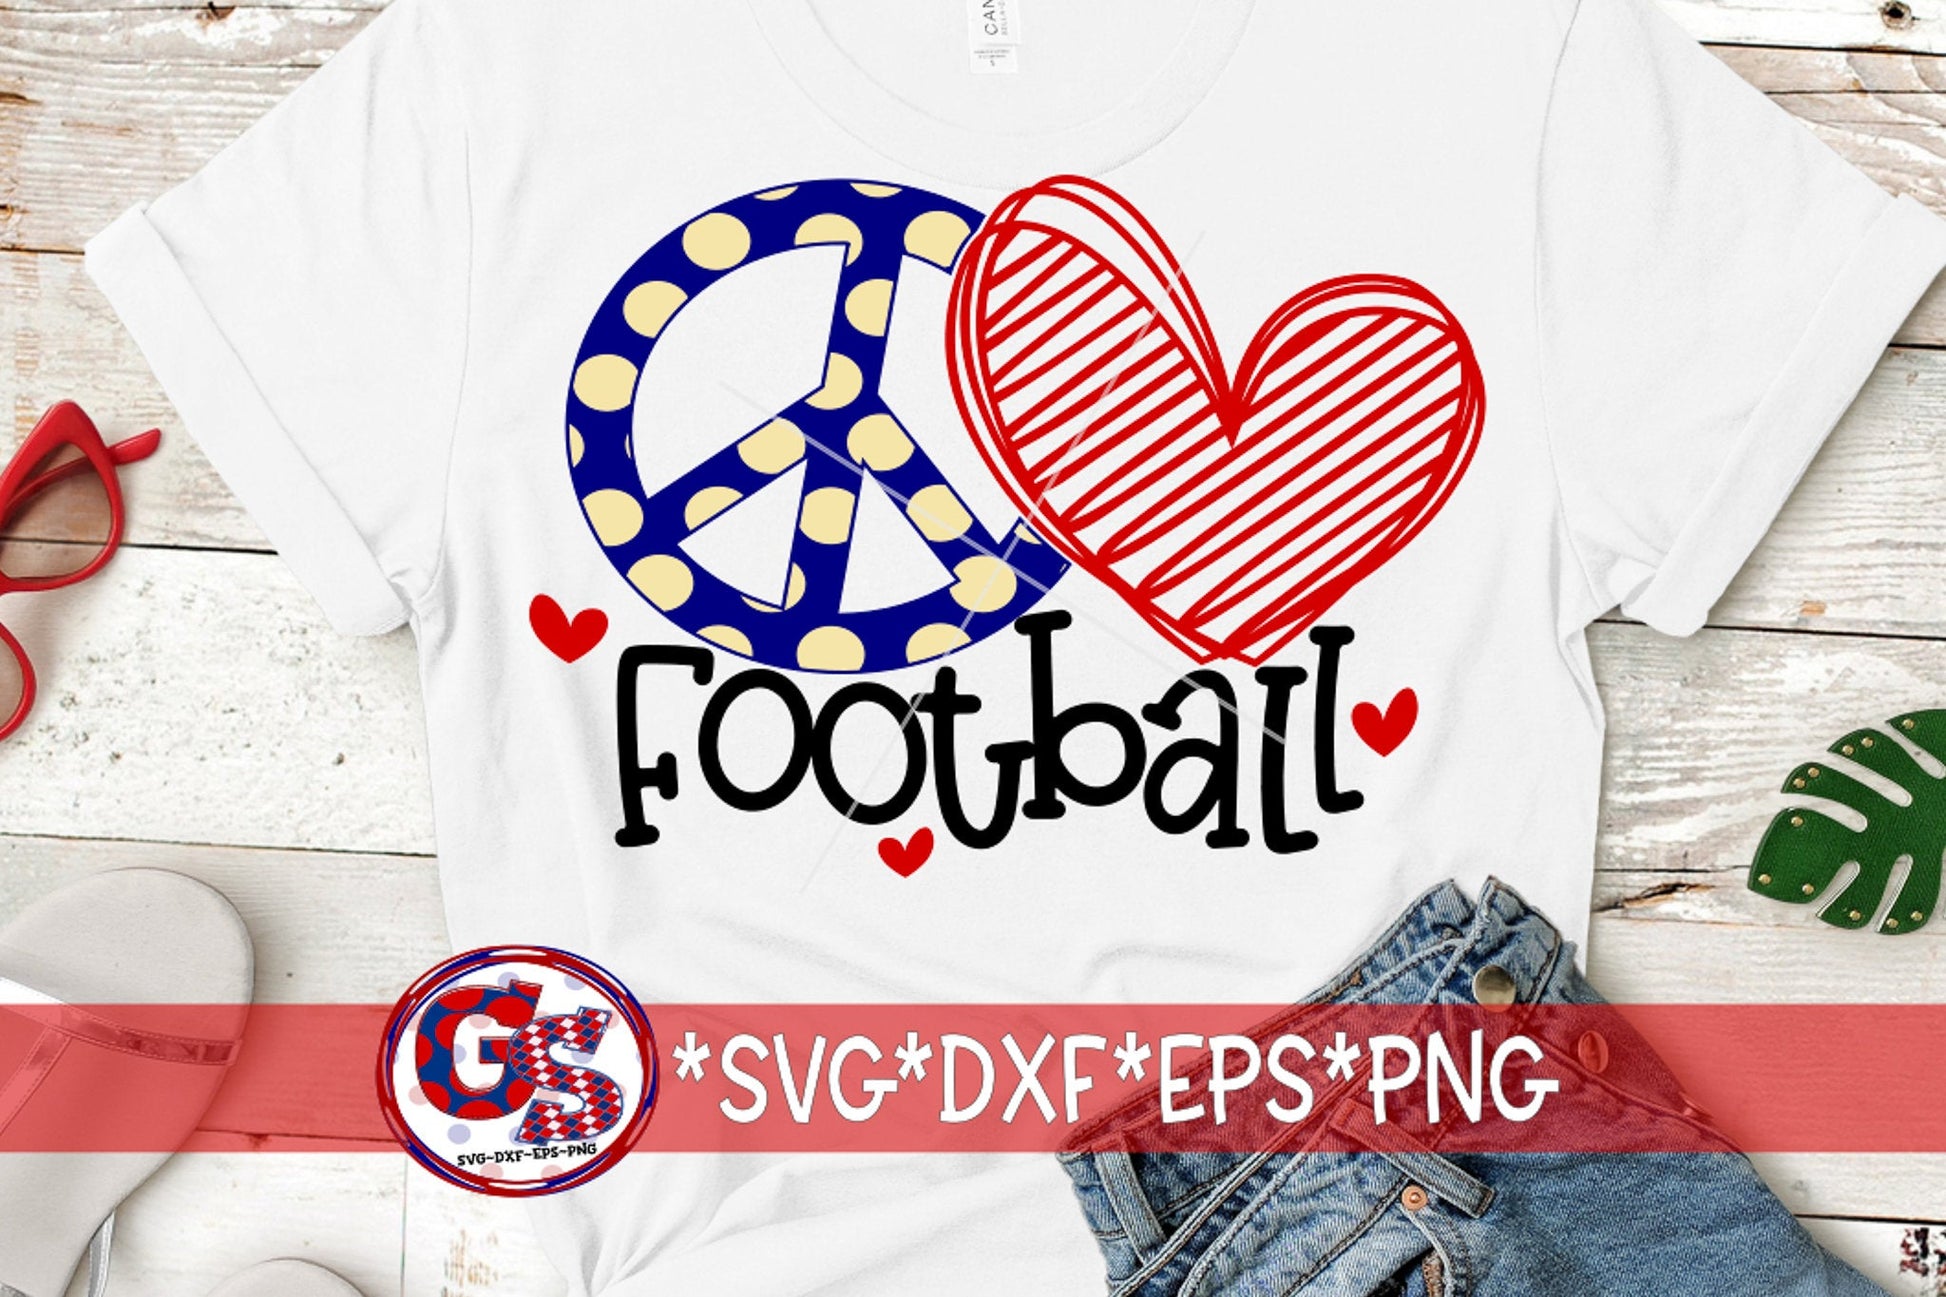 Peace Love Football svg eps dxf png | Football DxF | Tailgates SvG | Touchdowns SvG | Friday Night Lights SvG | Instant Download Cut File